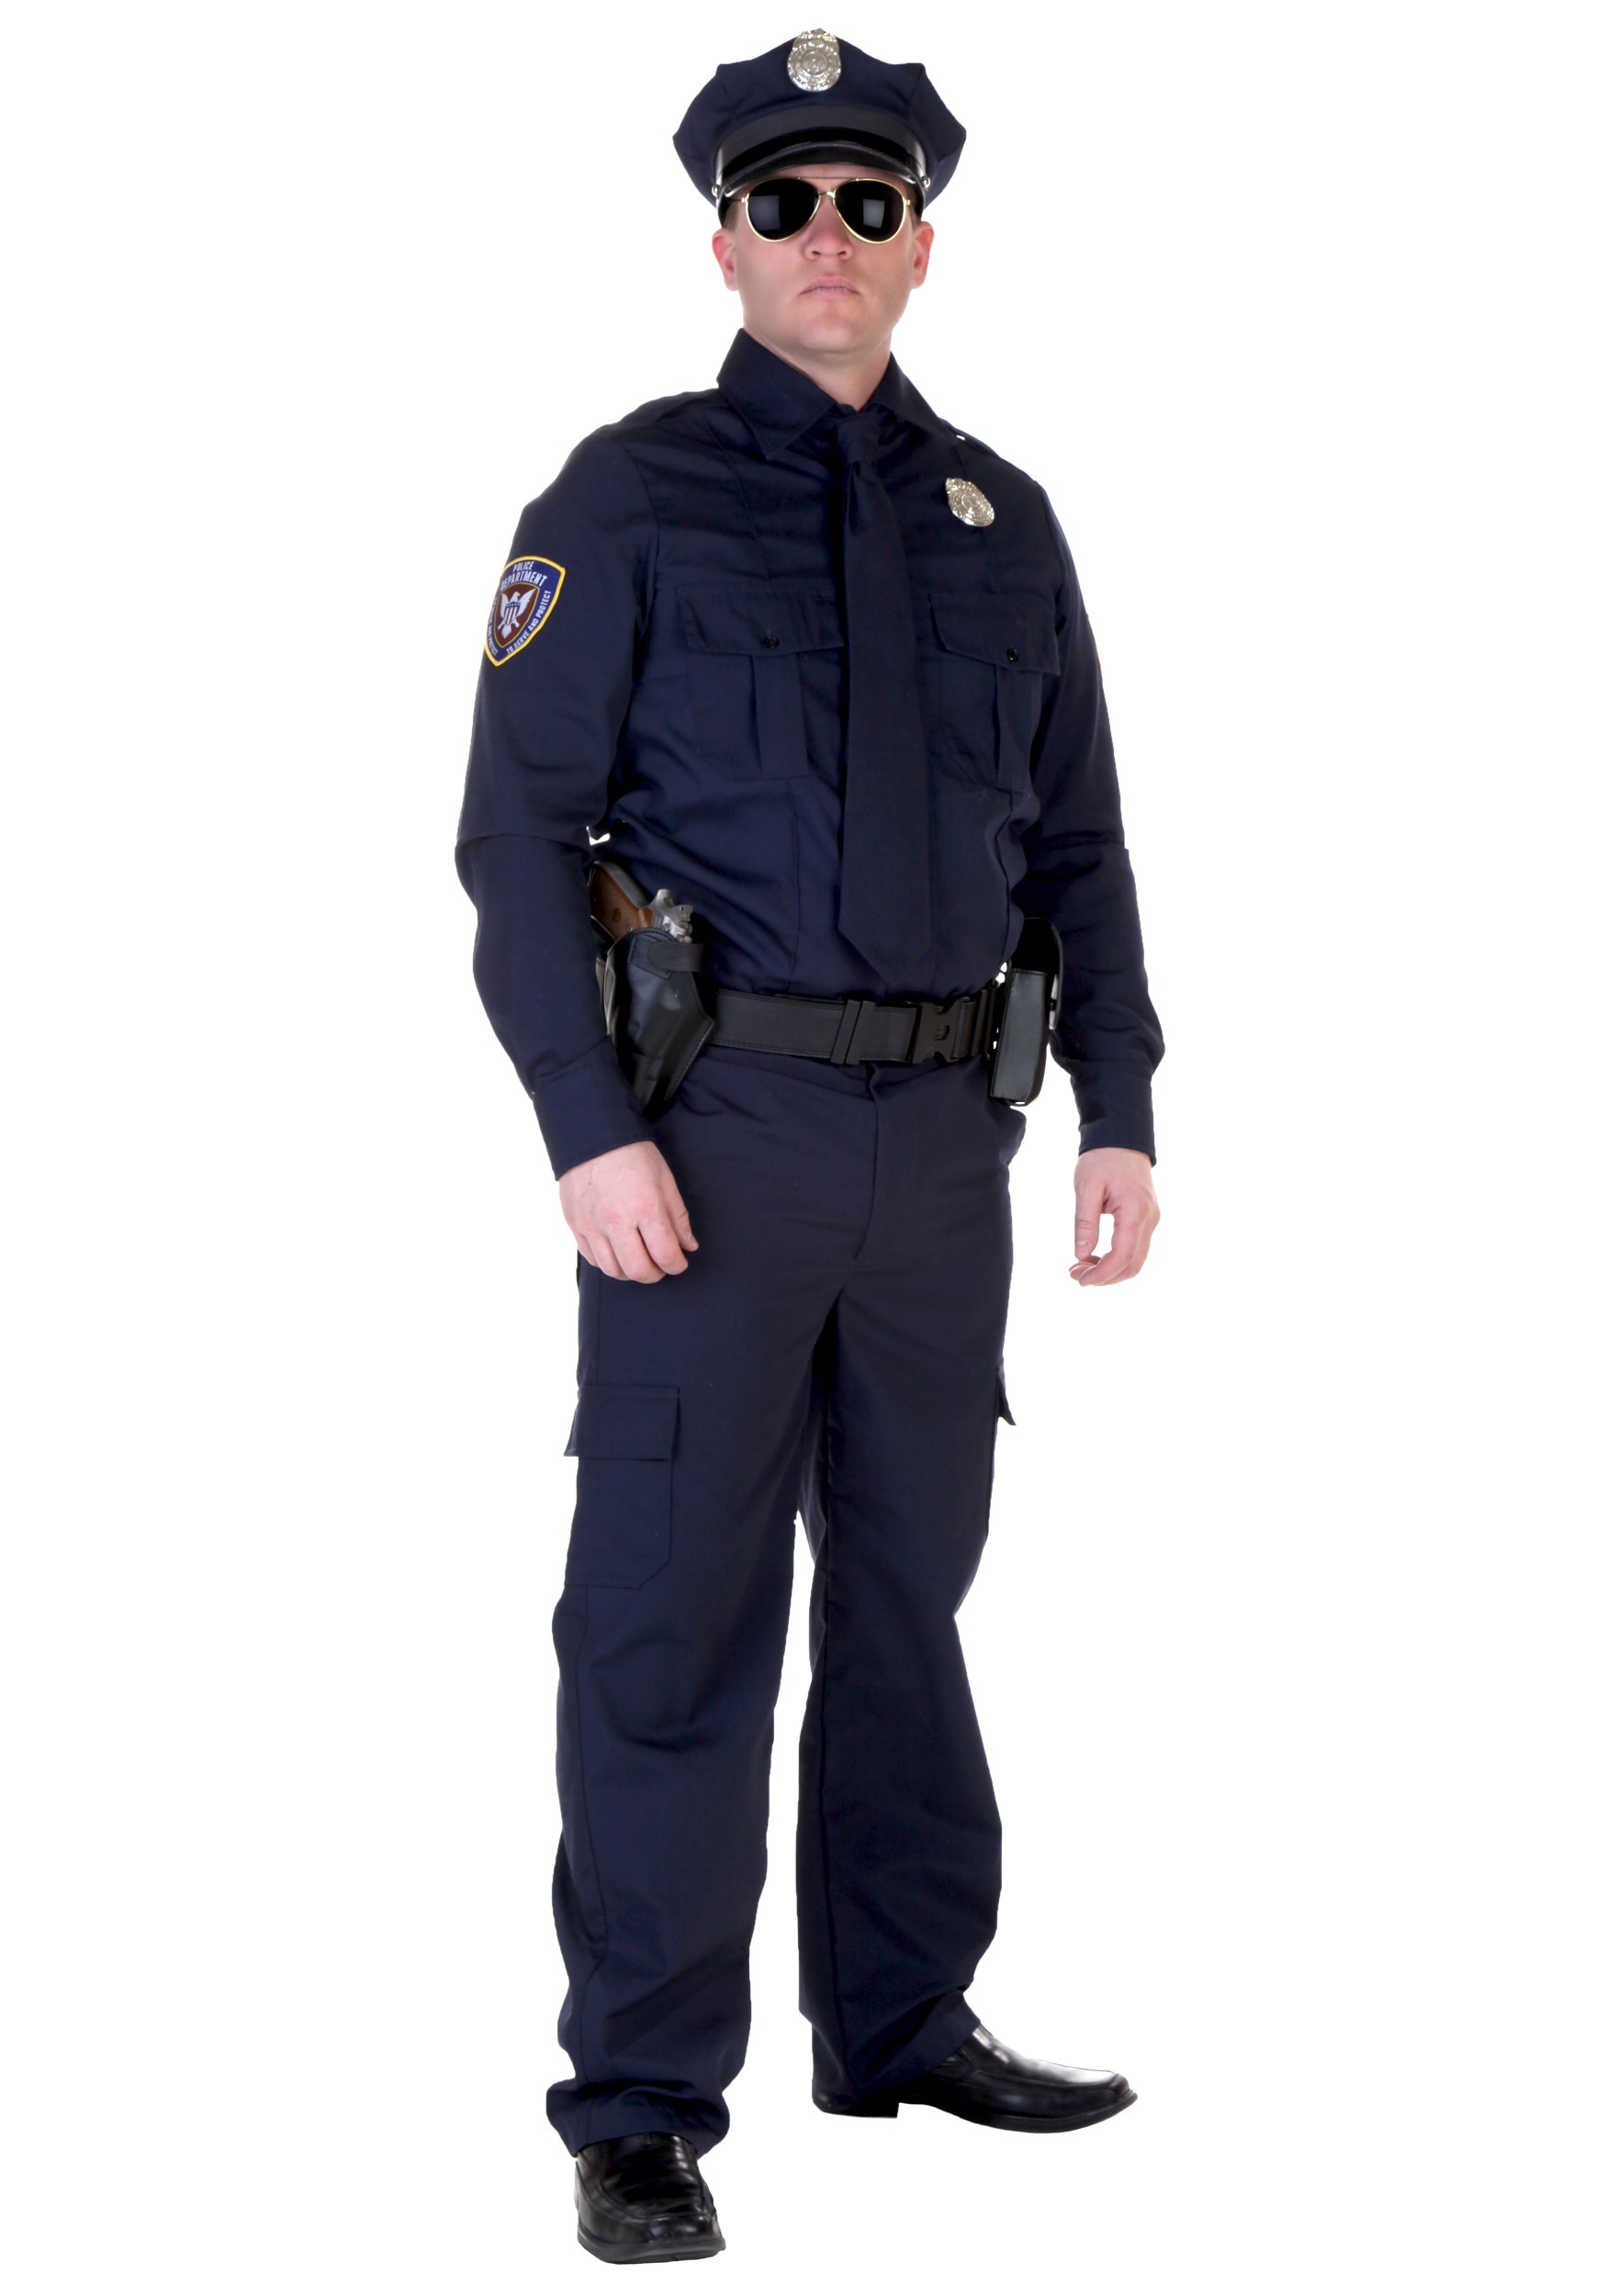 Authentic Cop Costume for Adults